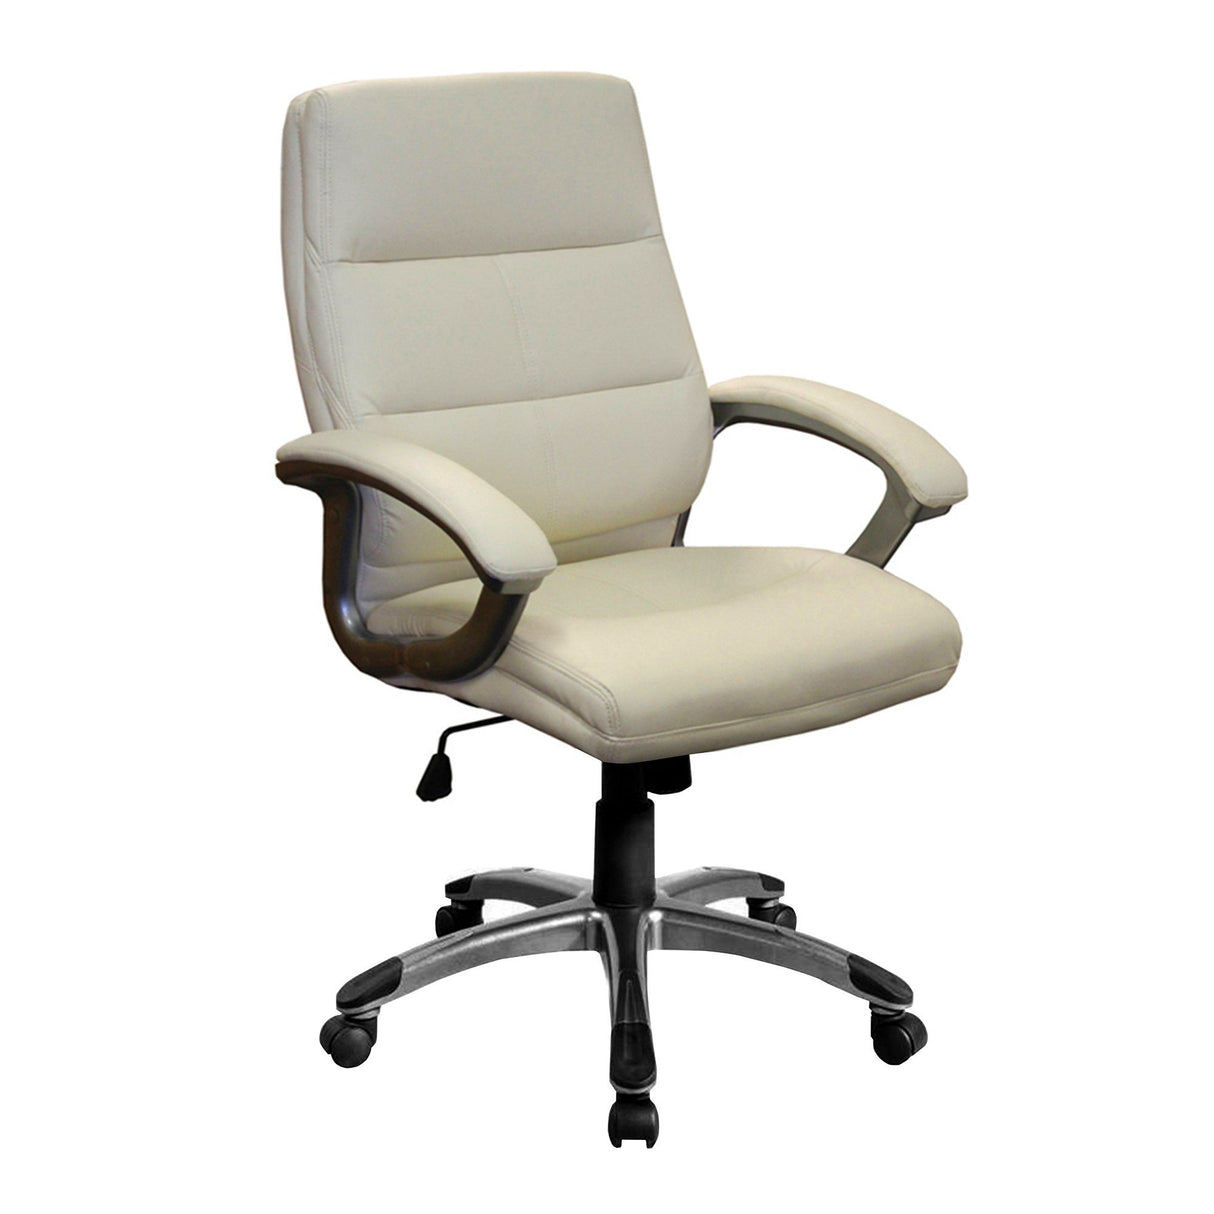 Nautilus Designs Greenwich High Back Leather Effect Executive Armchair with Silver Detailed Black Nylon Base - Cream